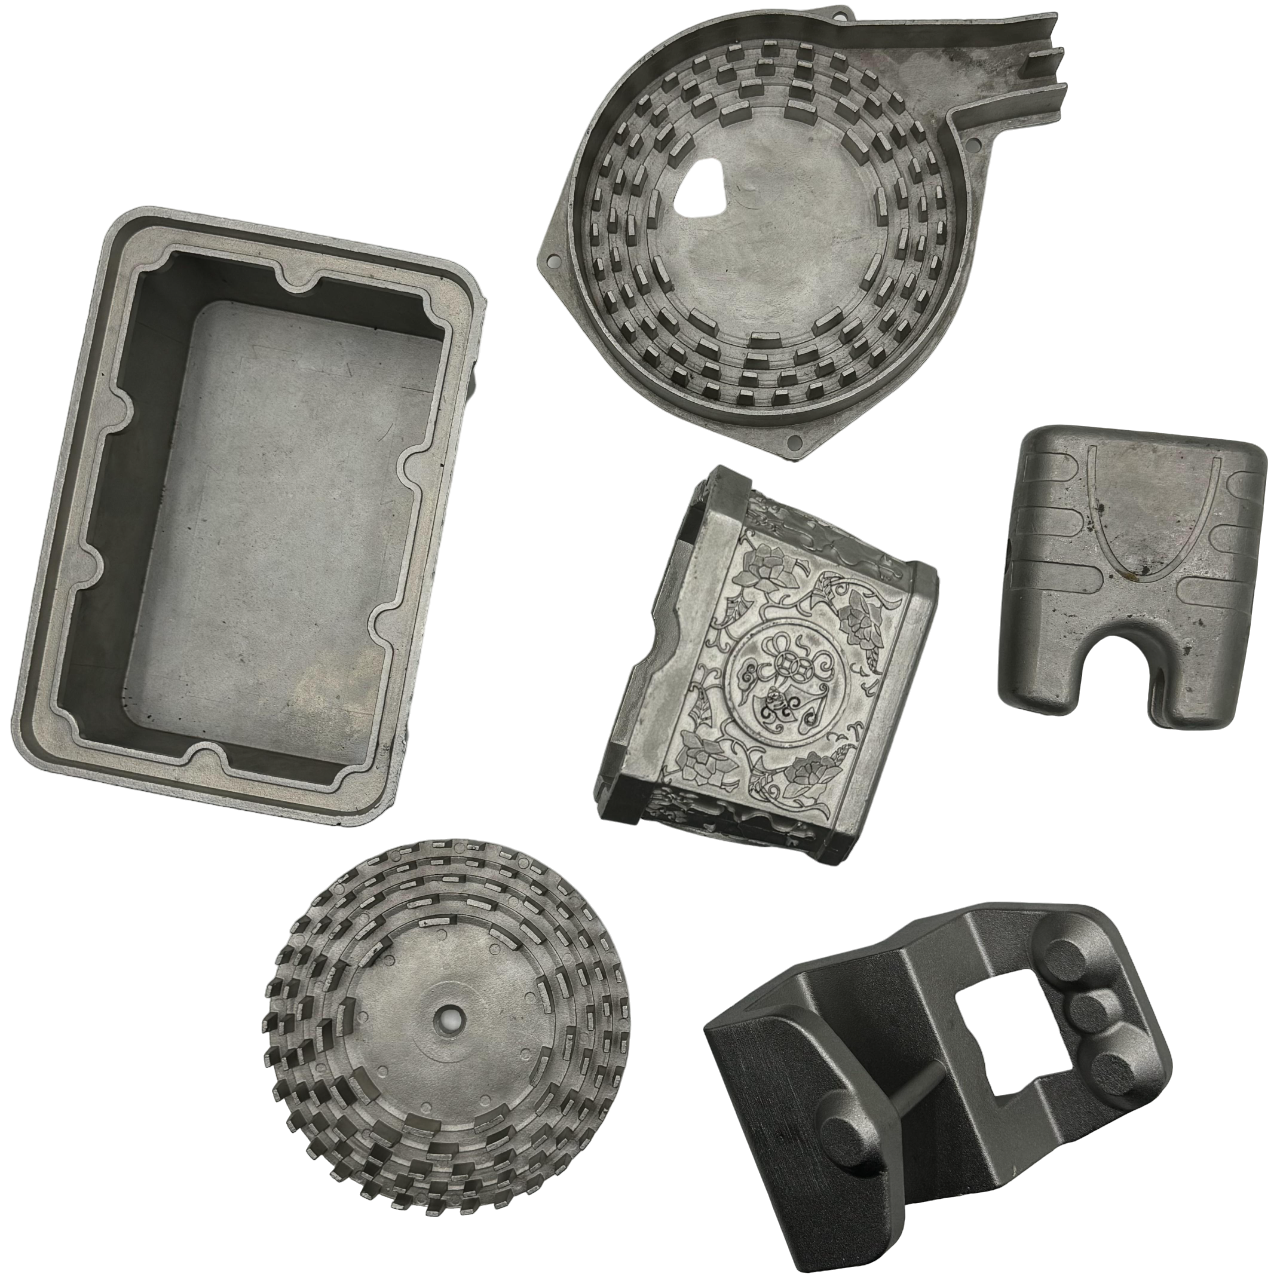 Stainless Steel Precision Casting Services Foundry Factory Silica Sol Parts